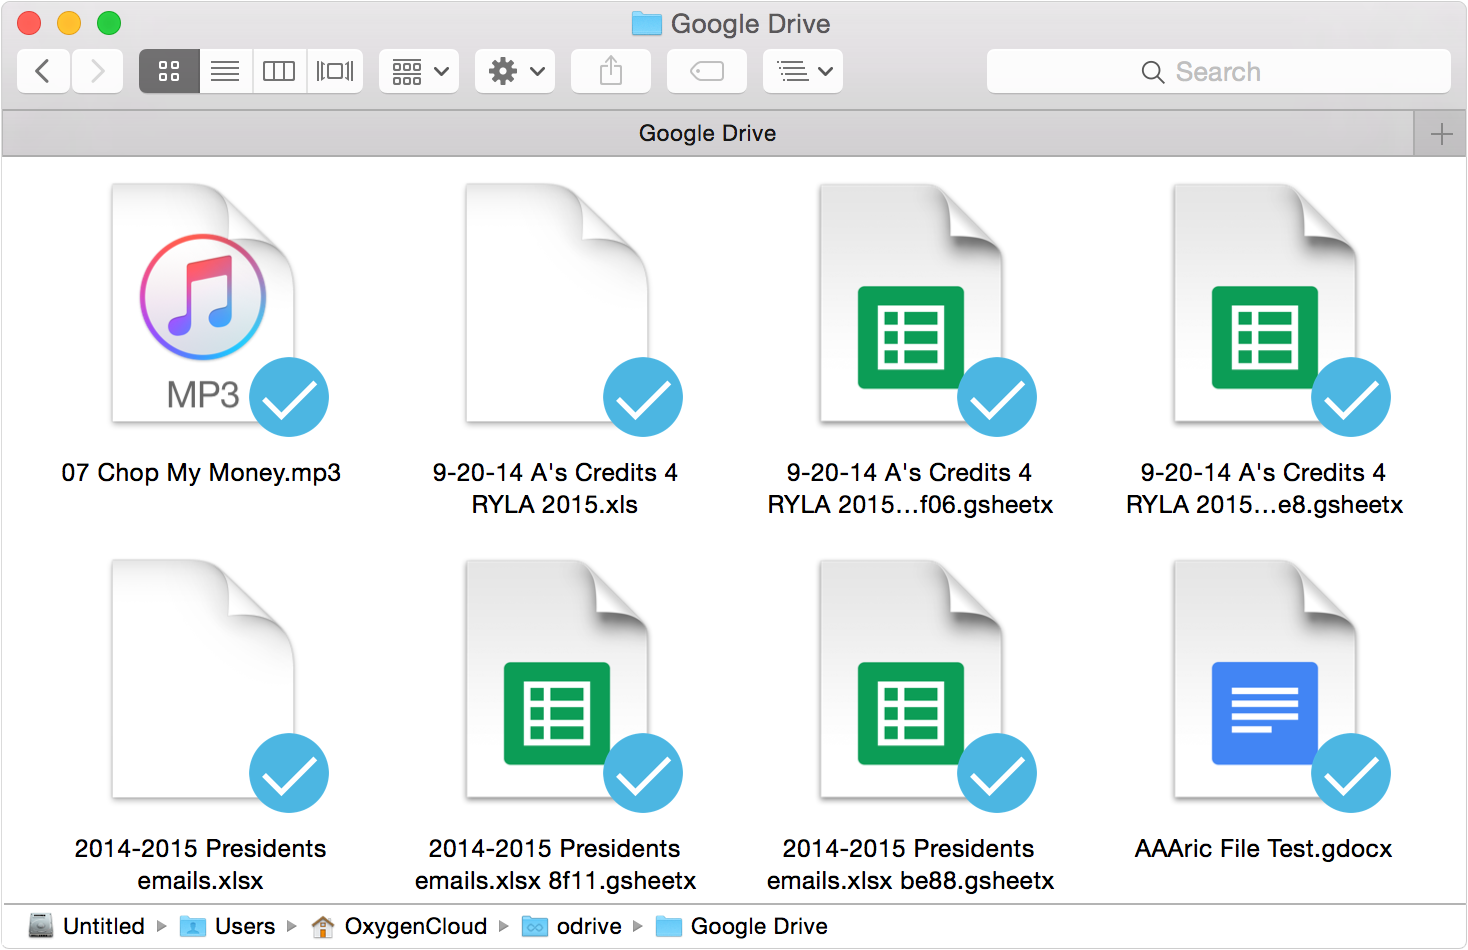 Access all the Google Doc files